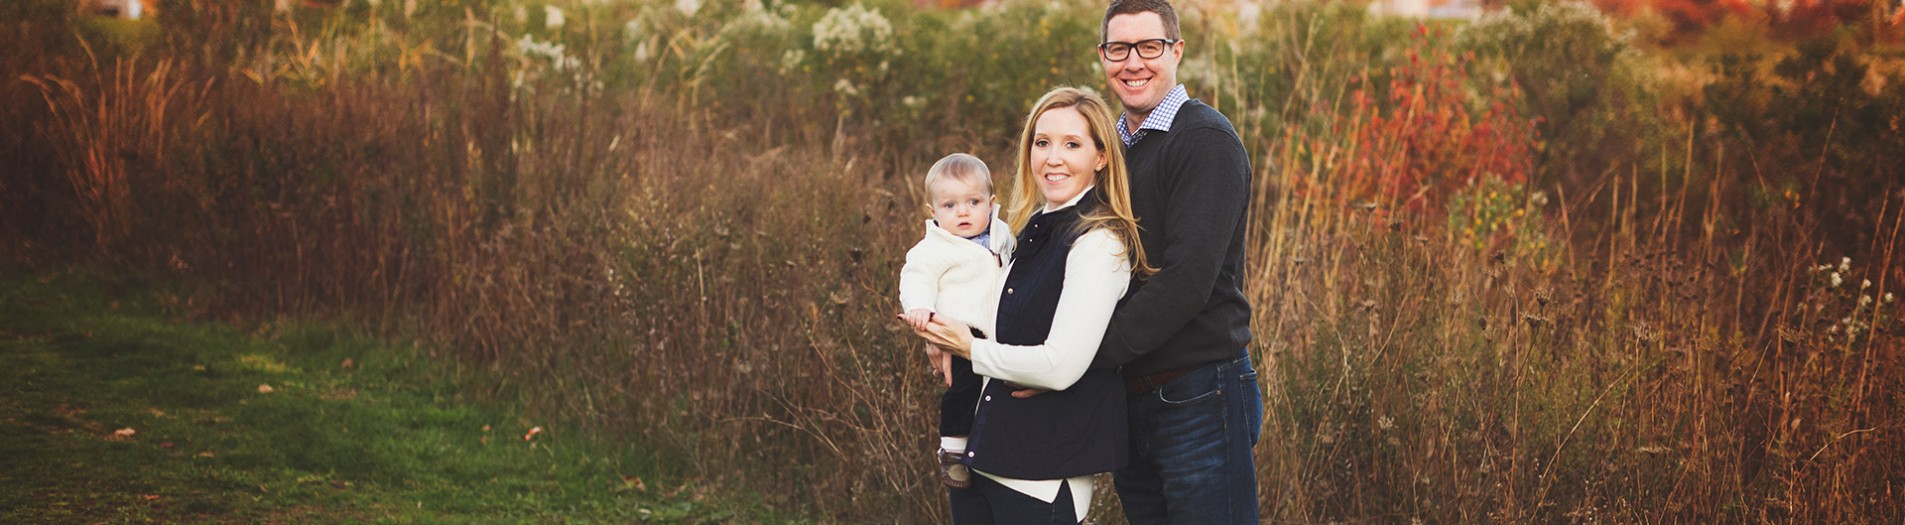 The Schneiders {Jersey City, Hoboken, Family Photography}